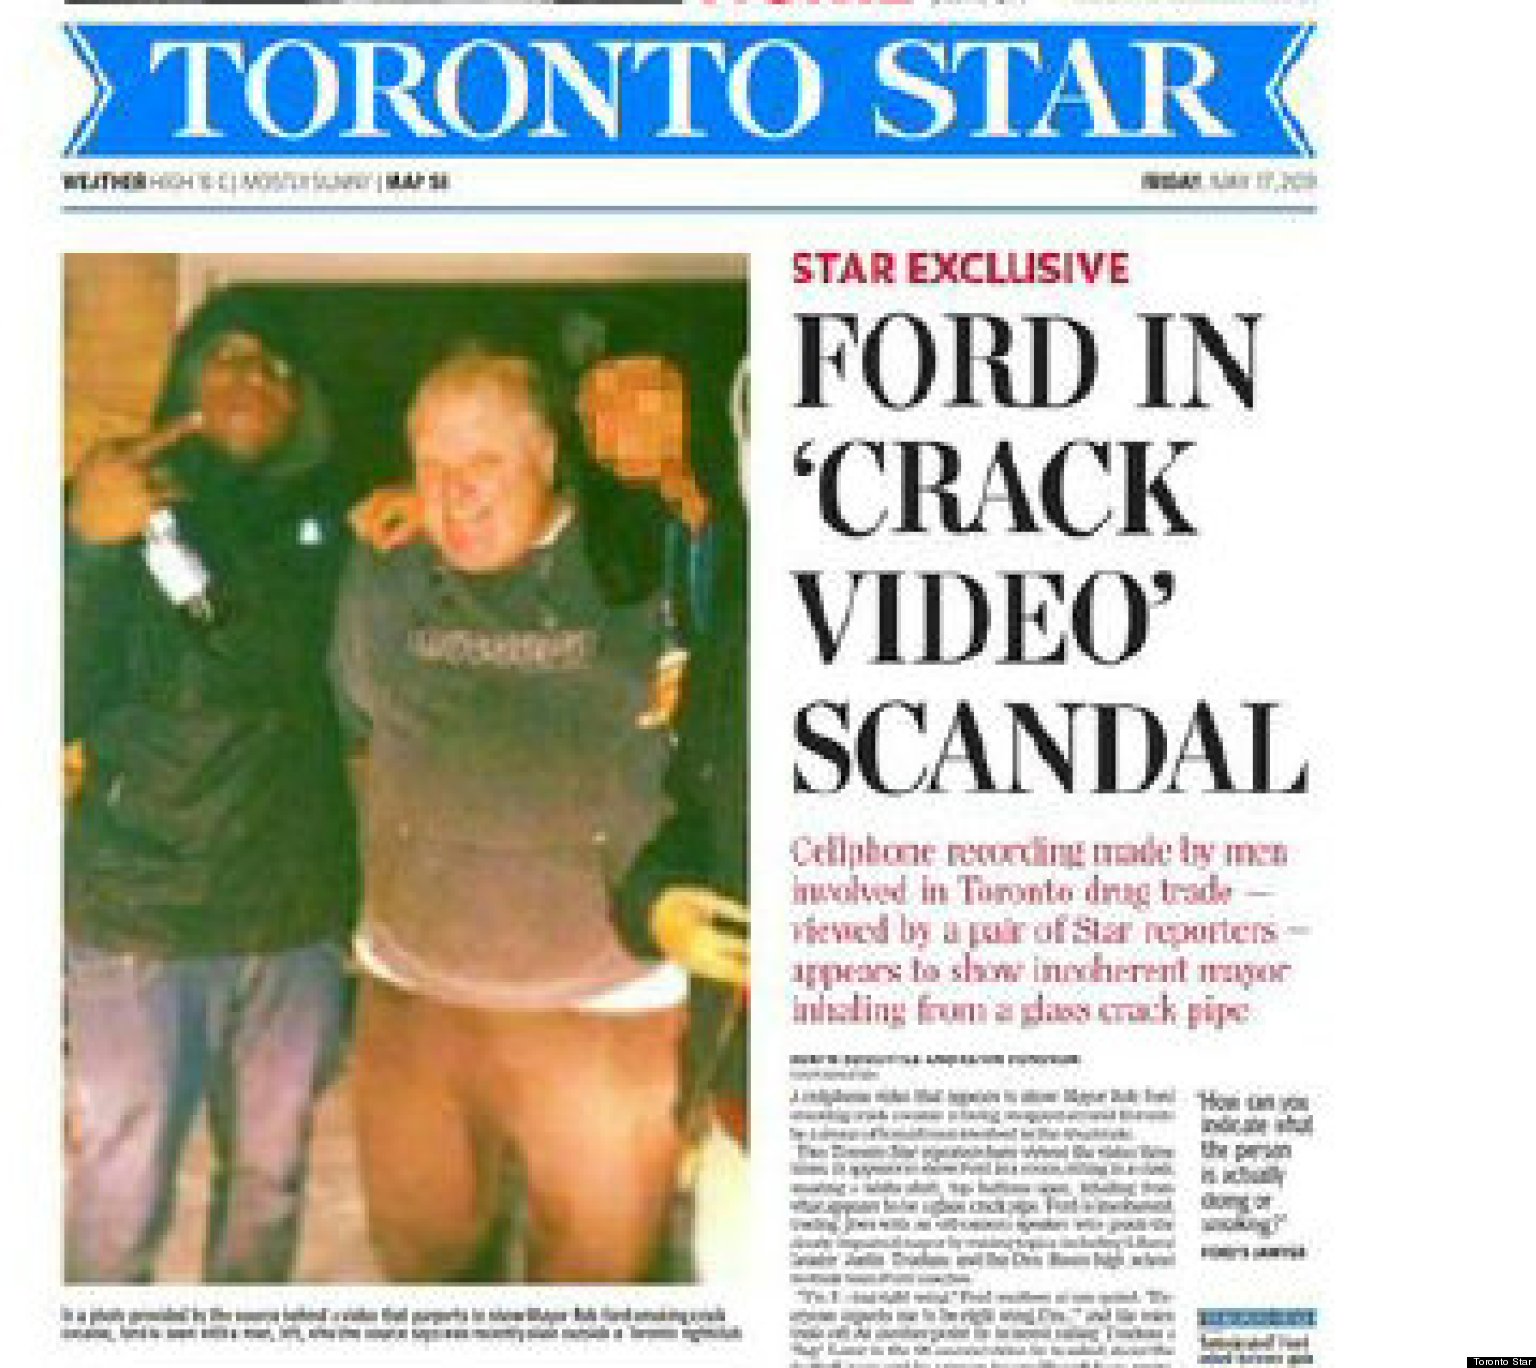 Hitler learns rob ford smokes crack #9